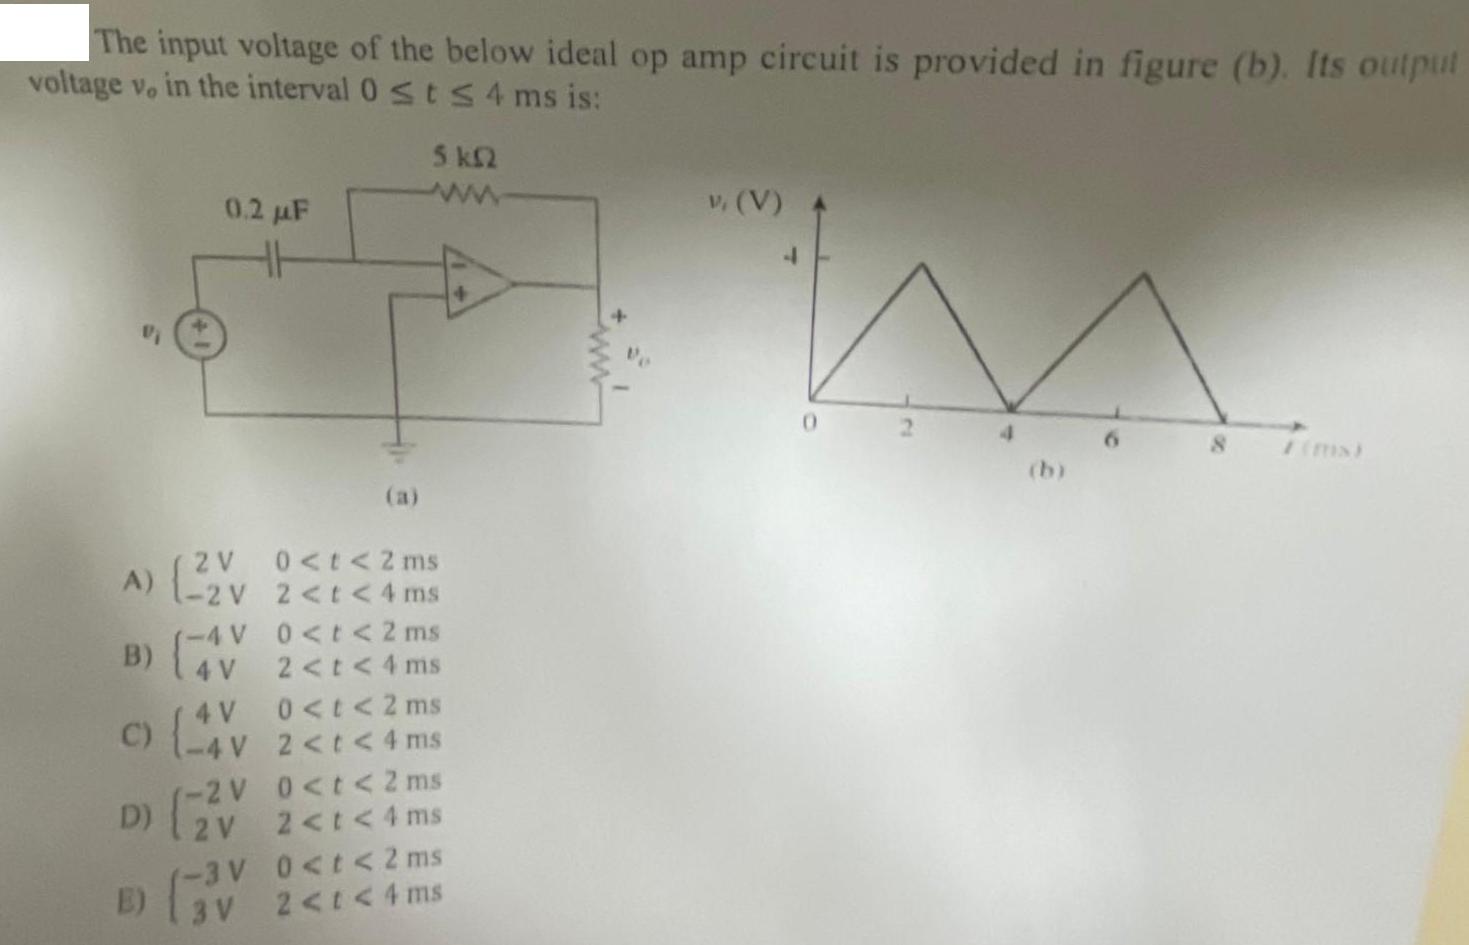 The input voltage of the below ideal op amp circuit is provided in figure (b). Its output voltage v, in the